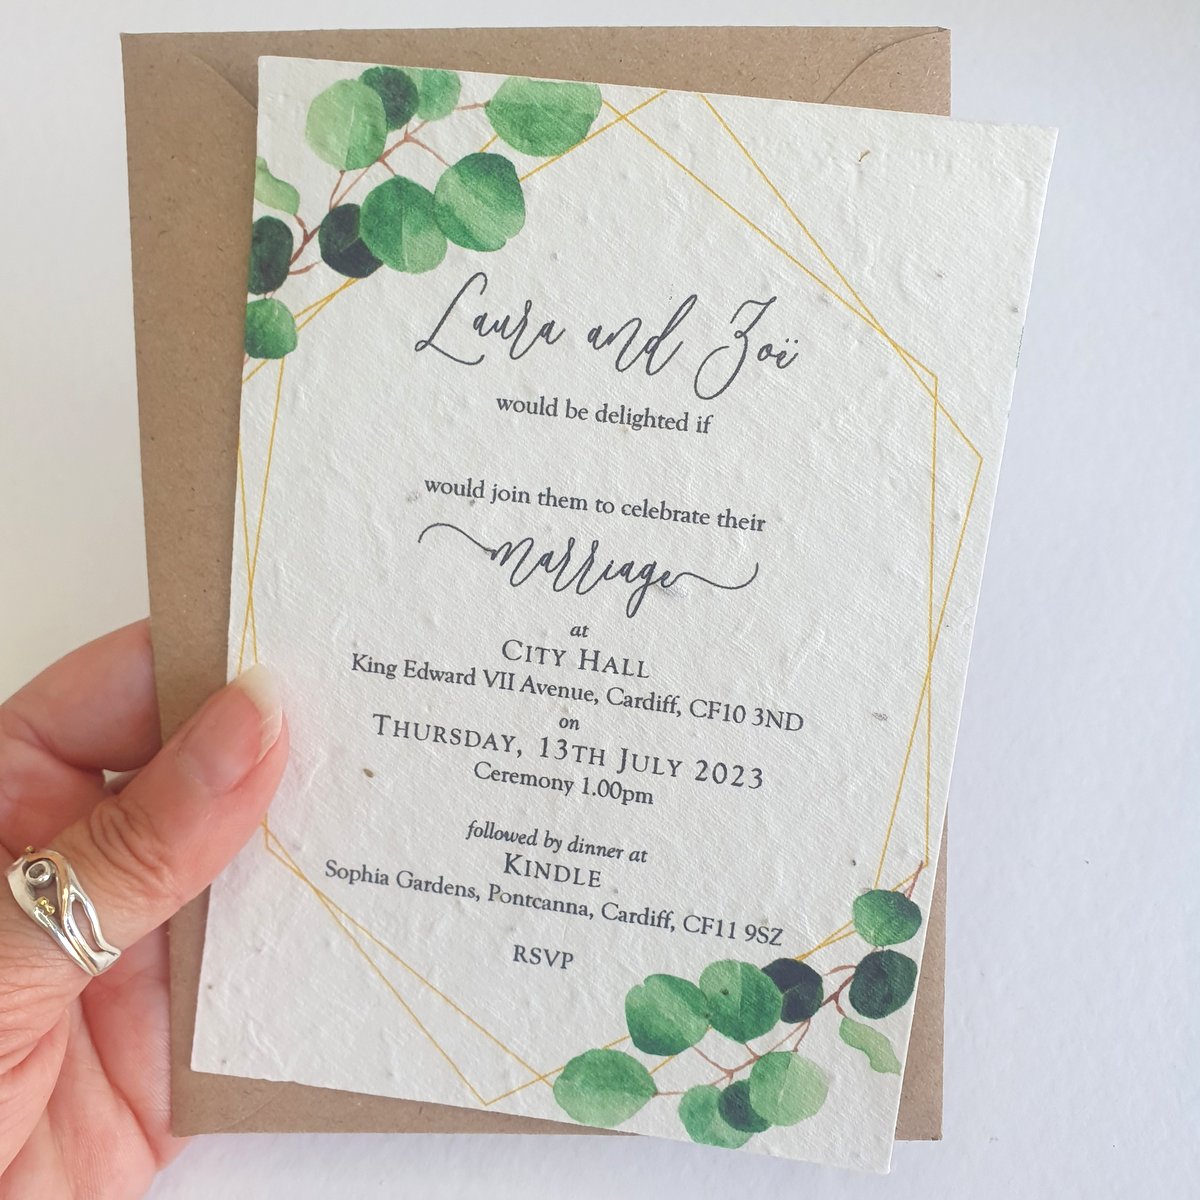 a wedding invitation with green eucalyptus leaves printed on the corners. The invitation is printed on seed paper and is shown with a recycled kraft brown envelope